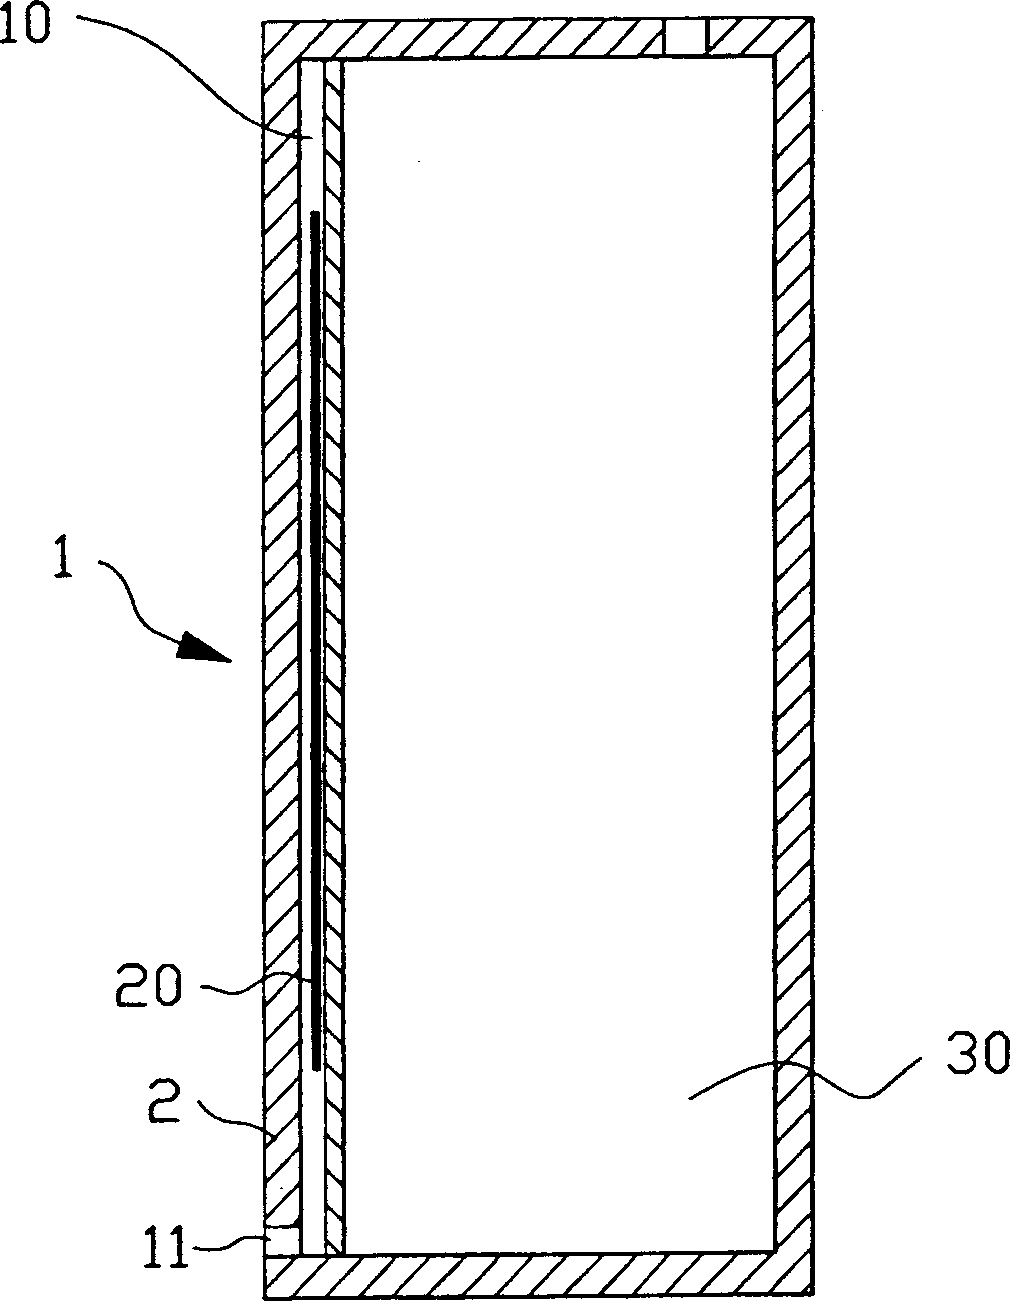 Suction pressure structure of cone-shaped spring in ink box